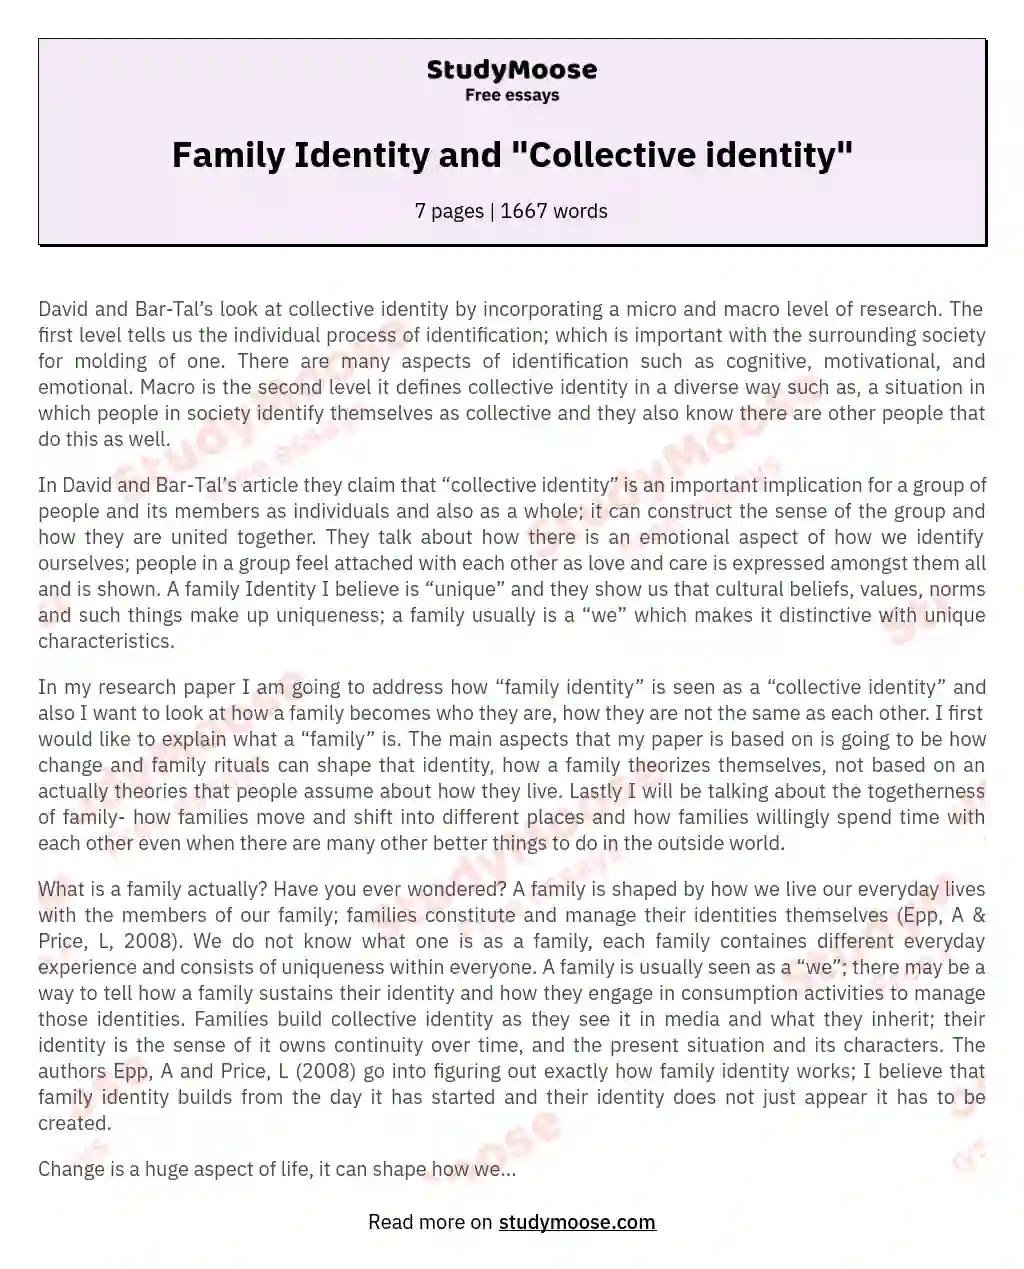 Family Identity and "Collective identity"